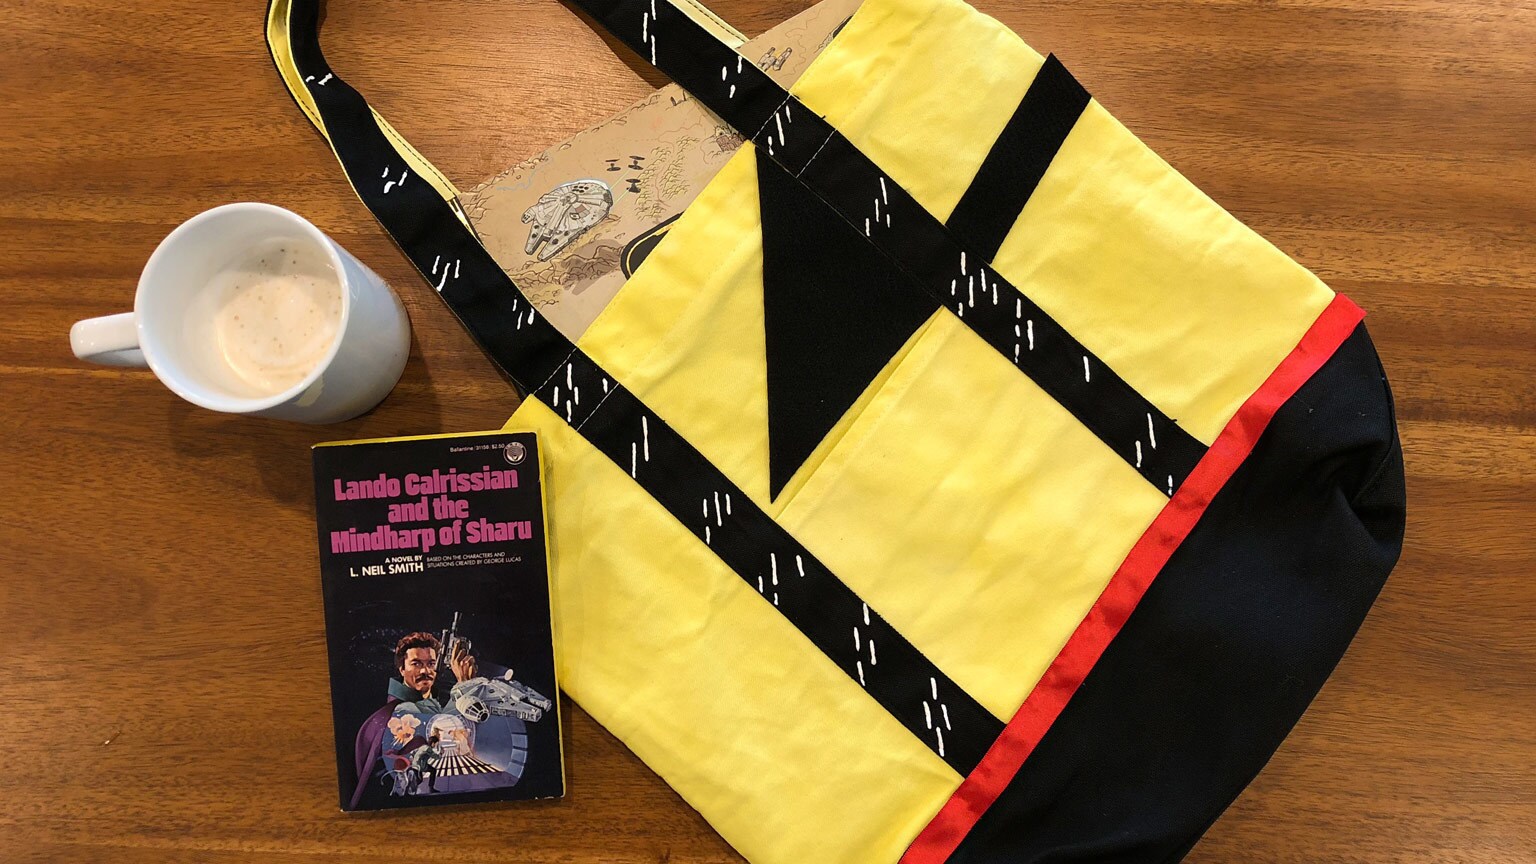 Hello, What Have We Made Here? A DIY Lando Calrissian Tote